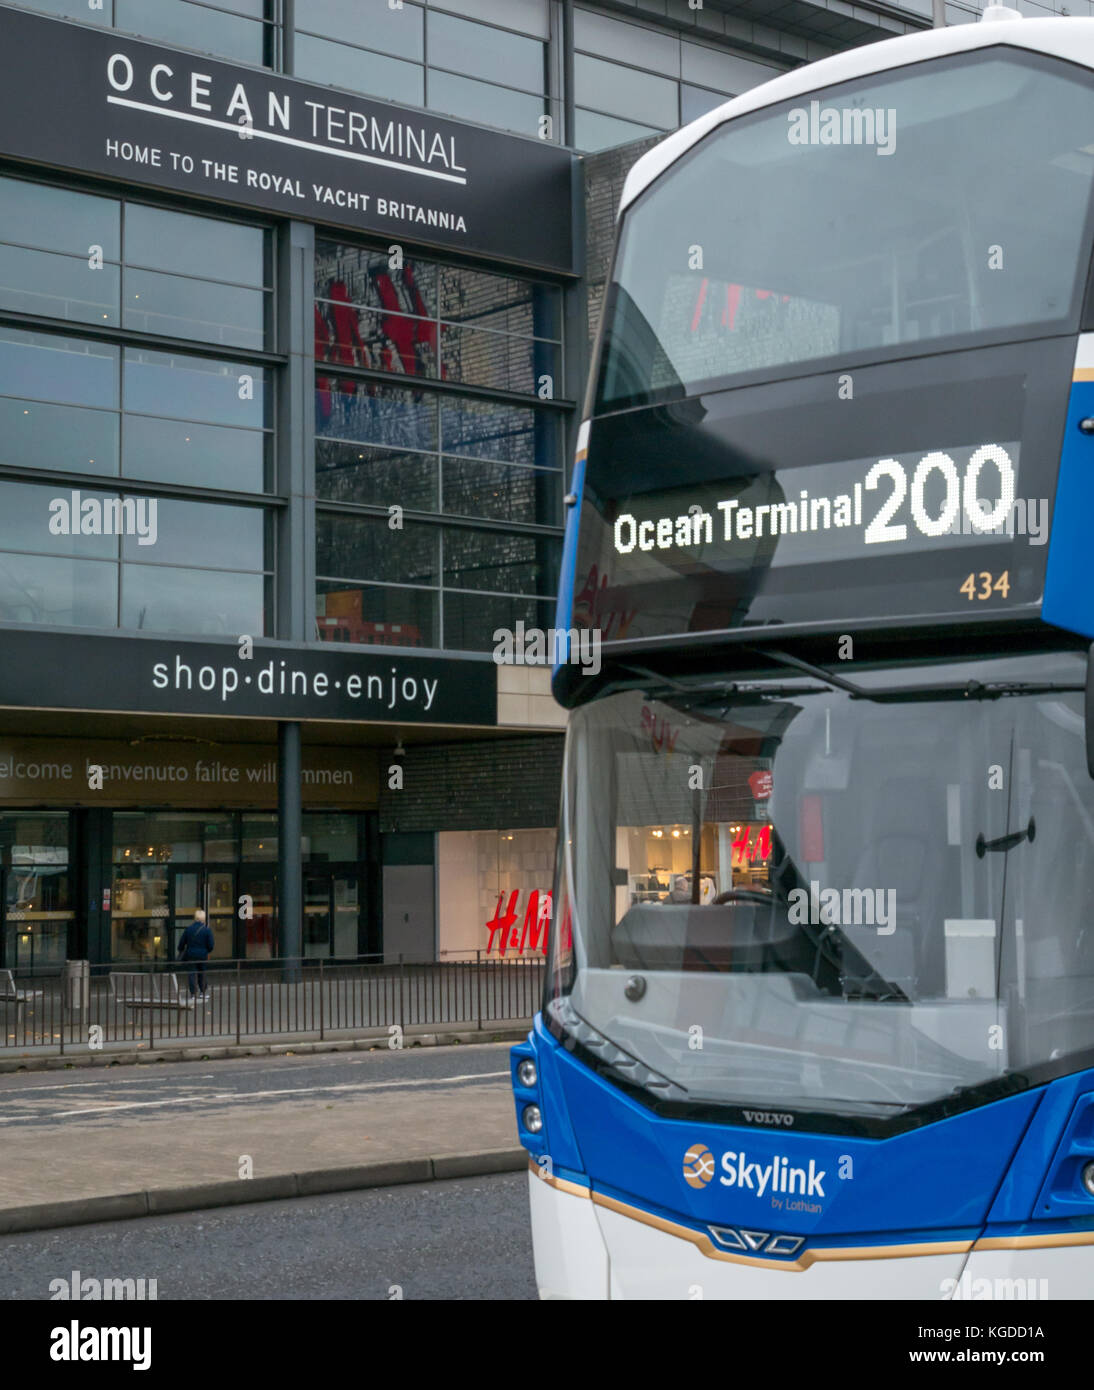 Number 200 Lothian Skylink bus at Ocean Terminal shopping mall entrance. Skylink service route runs from Ocean Terminal to Edinburgh Airport Stock Photo